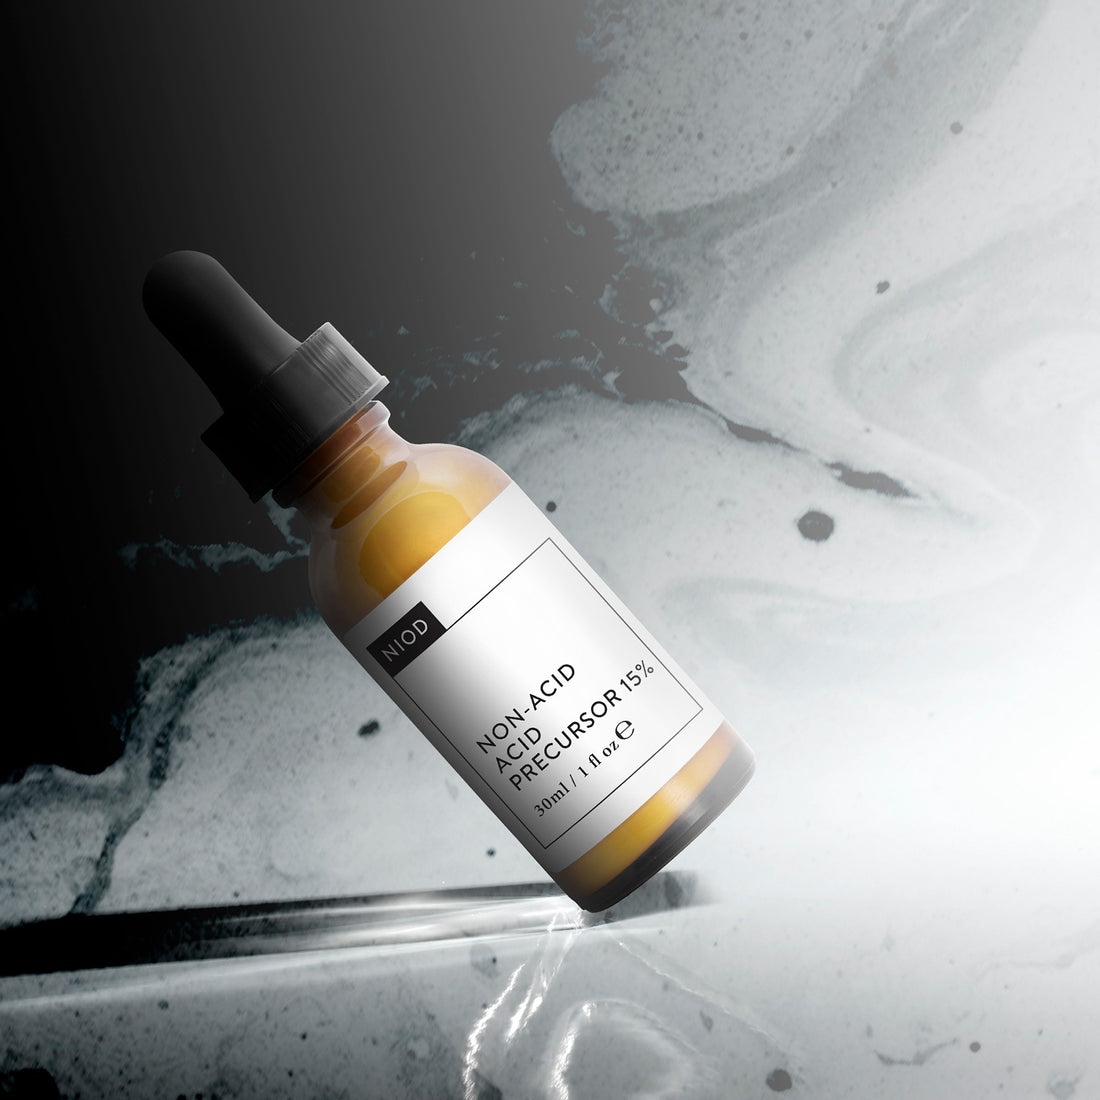 NIOD Non-Acid Precursor: Pro Resurfacing From The Comfort of Your Home